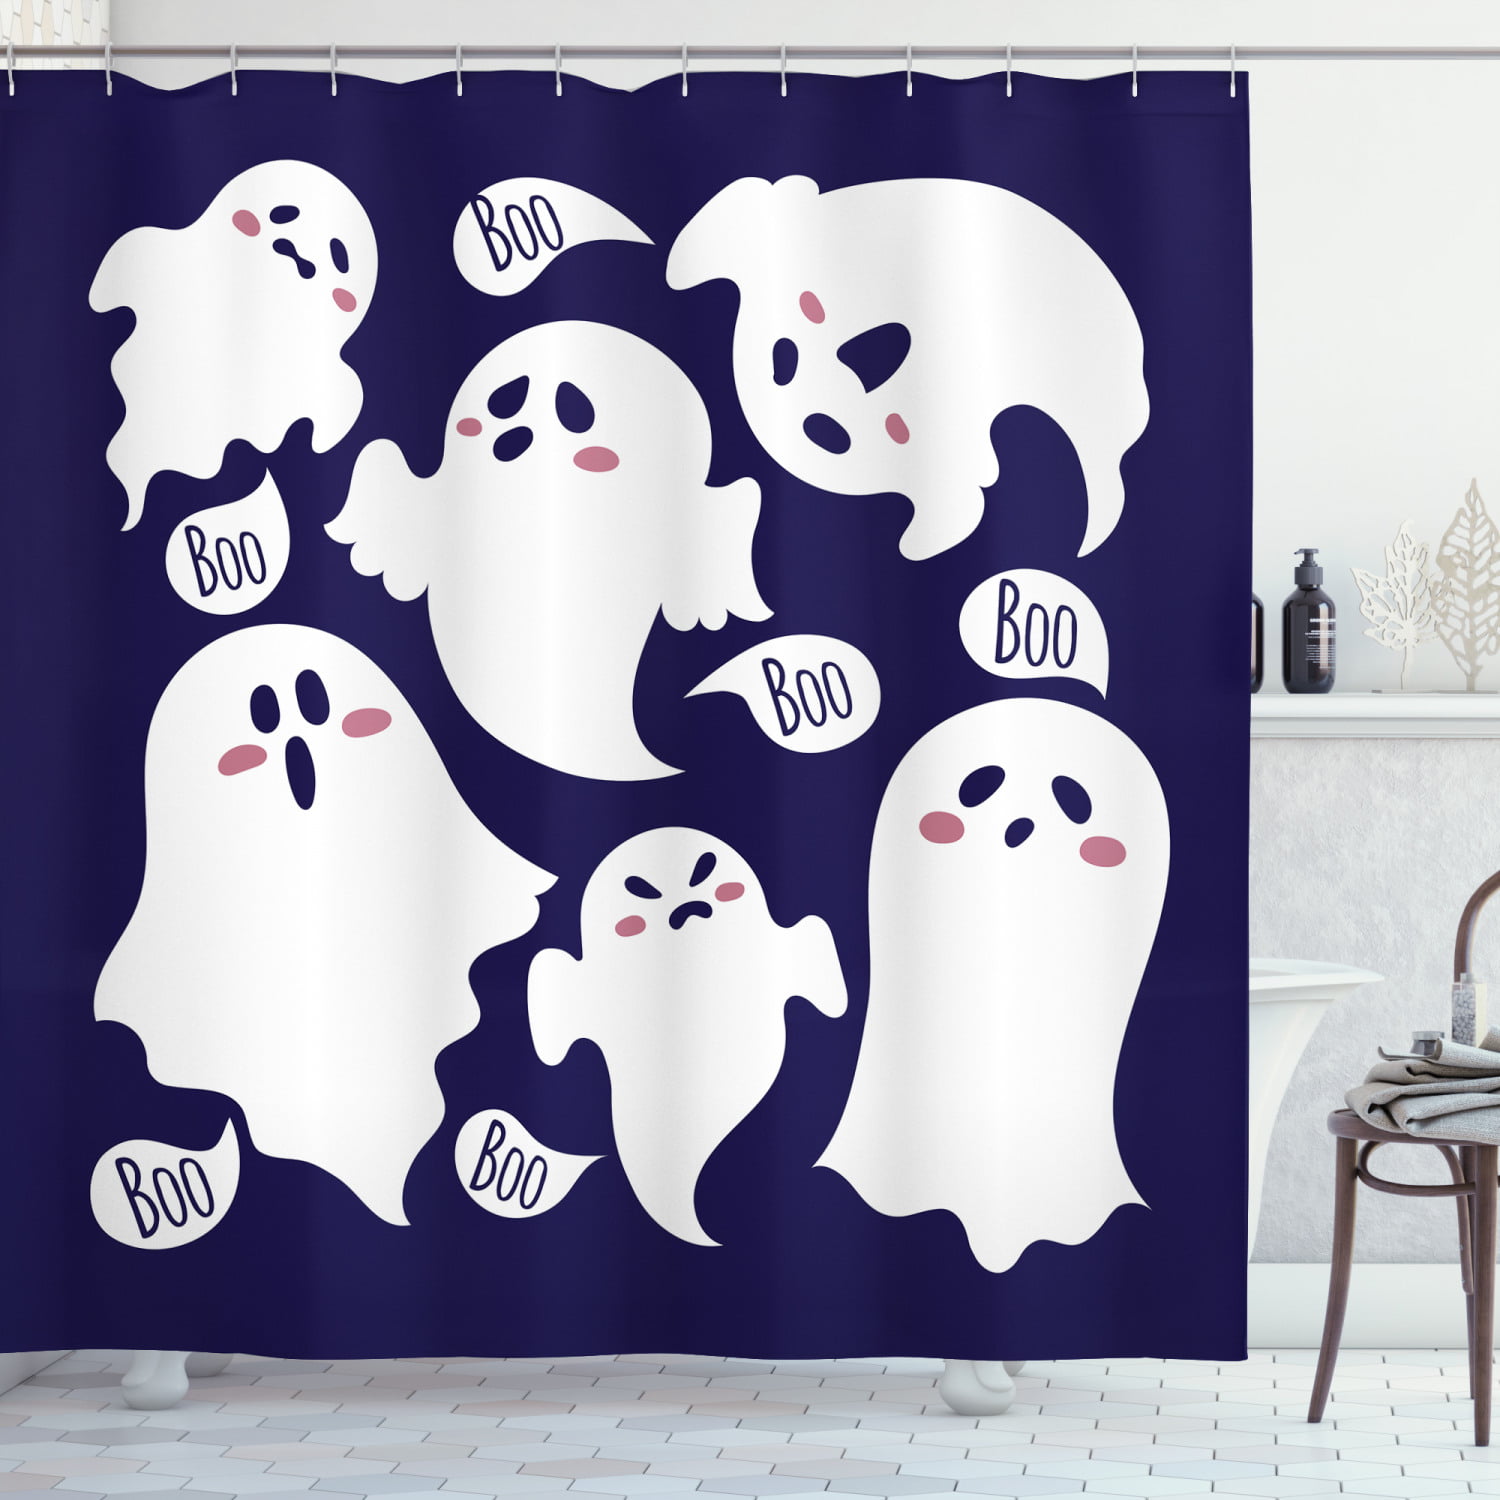 Ghost Shower Curtain, Scary Ghost Characters Drawn in Cartoon Style with  Boo Texts Pattern, Fabric Bathroom Set with Hooks, 69W X 75L Inches Long,  Indigo White Dried Rose, by Ambesonne 